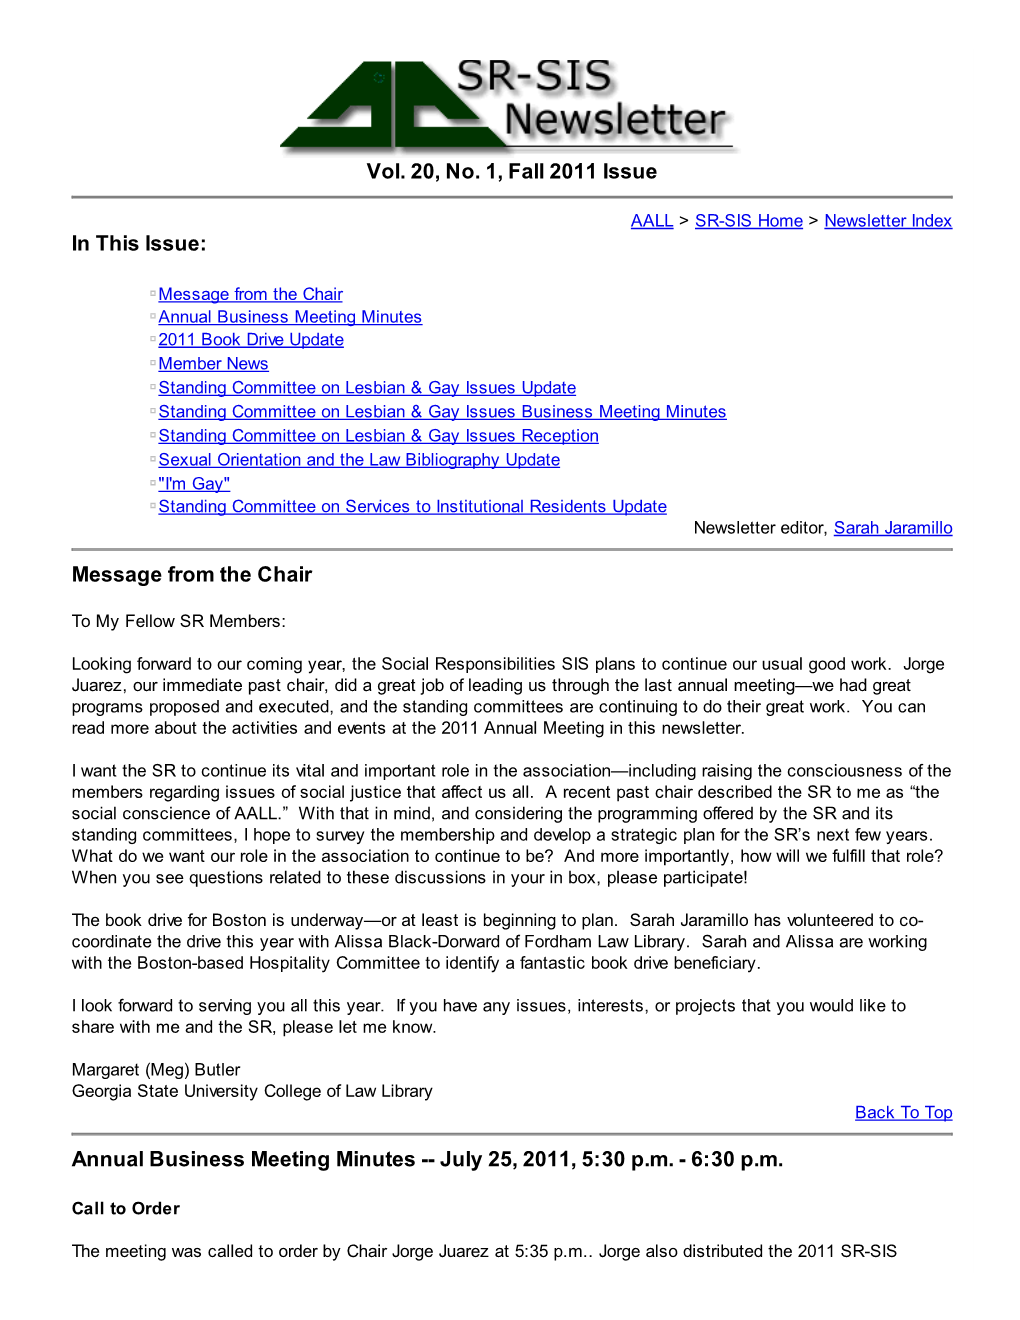 Vol. 20, No. 1, Fall 2011 Issue in This Issue: Message from the Chair Annual Business Meeting Minutes -- July 25, 2011, 5:30